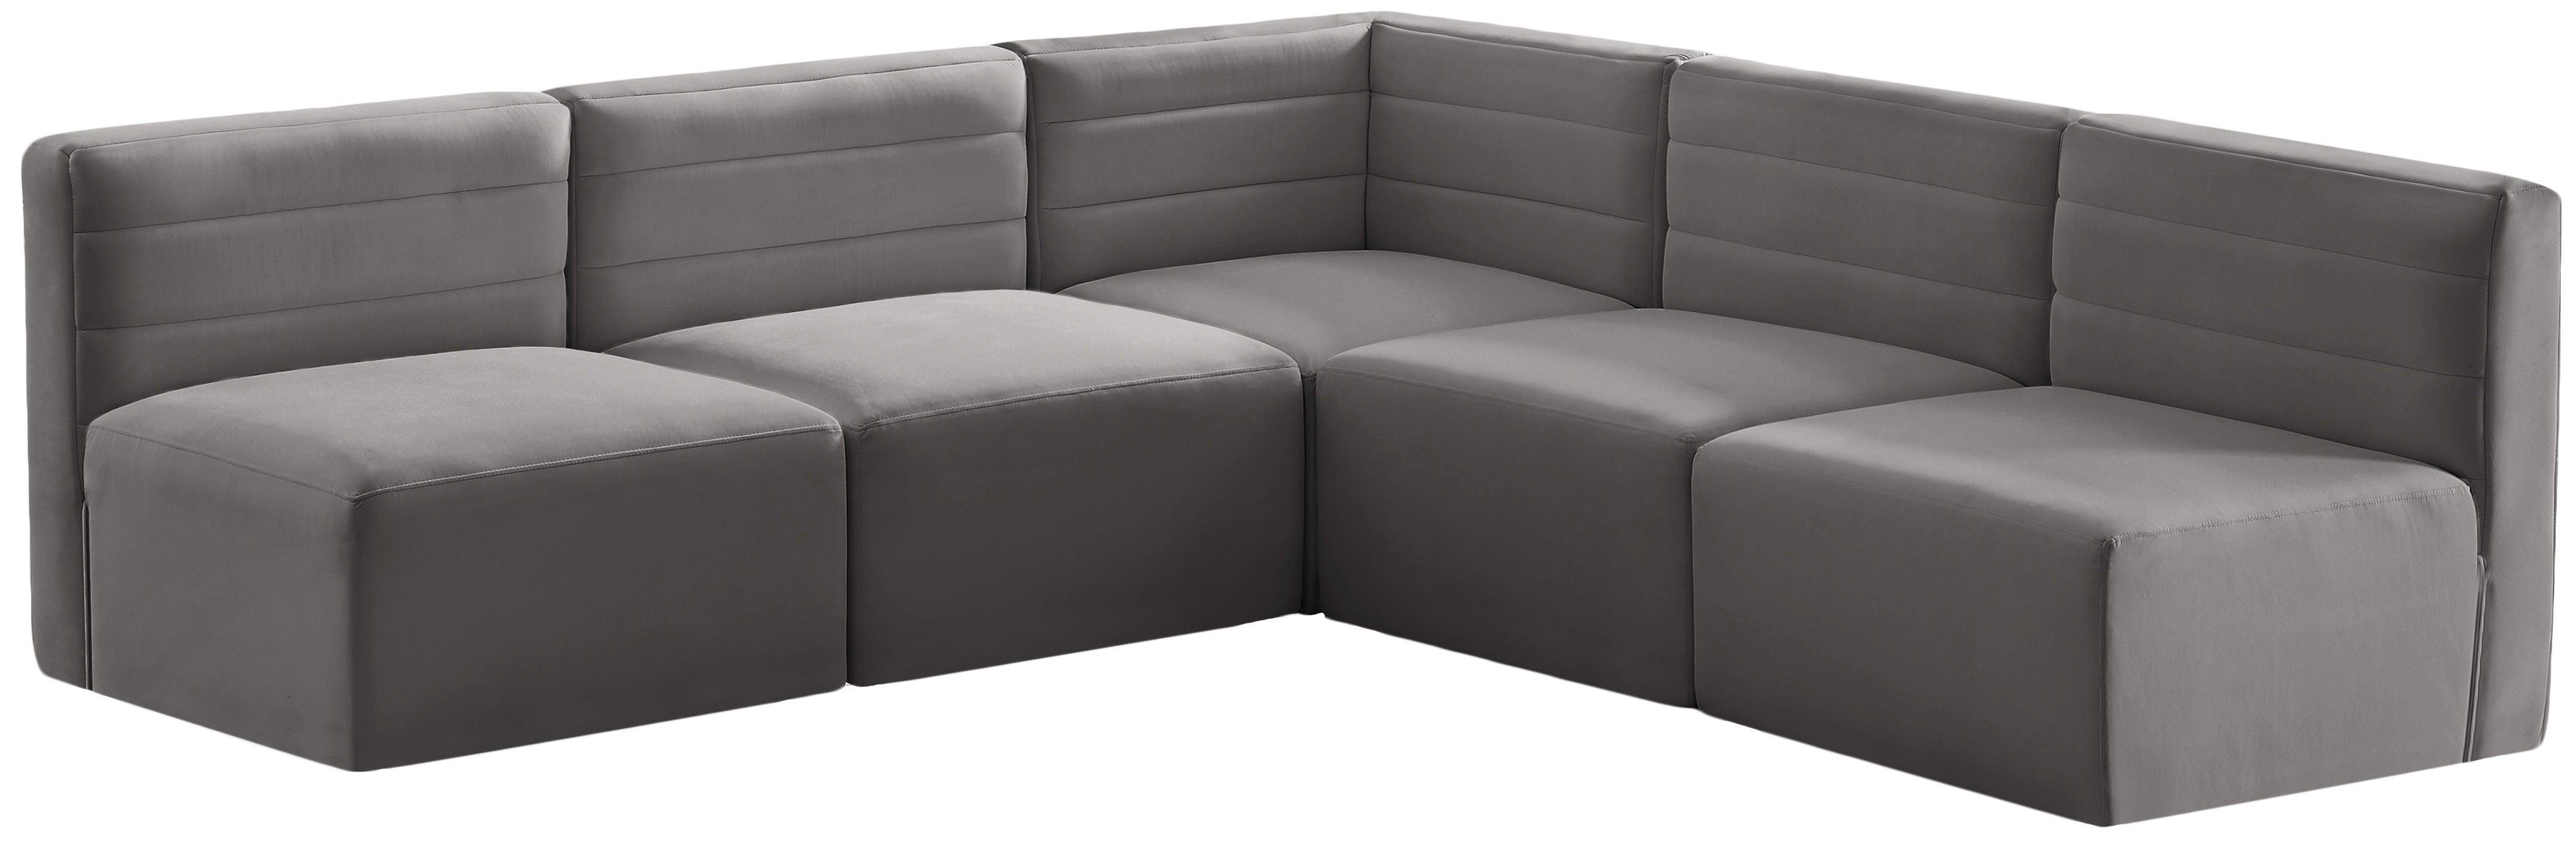 Meridian Furniture - Quincy - Modular Sectional 5 Piece - Grey - Fabric - Modern & Contemporary - 5th Avenue Furniture